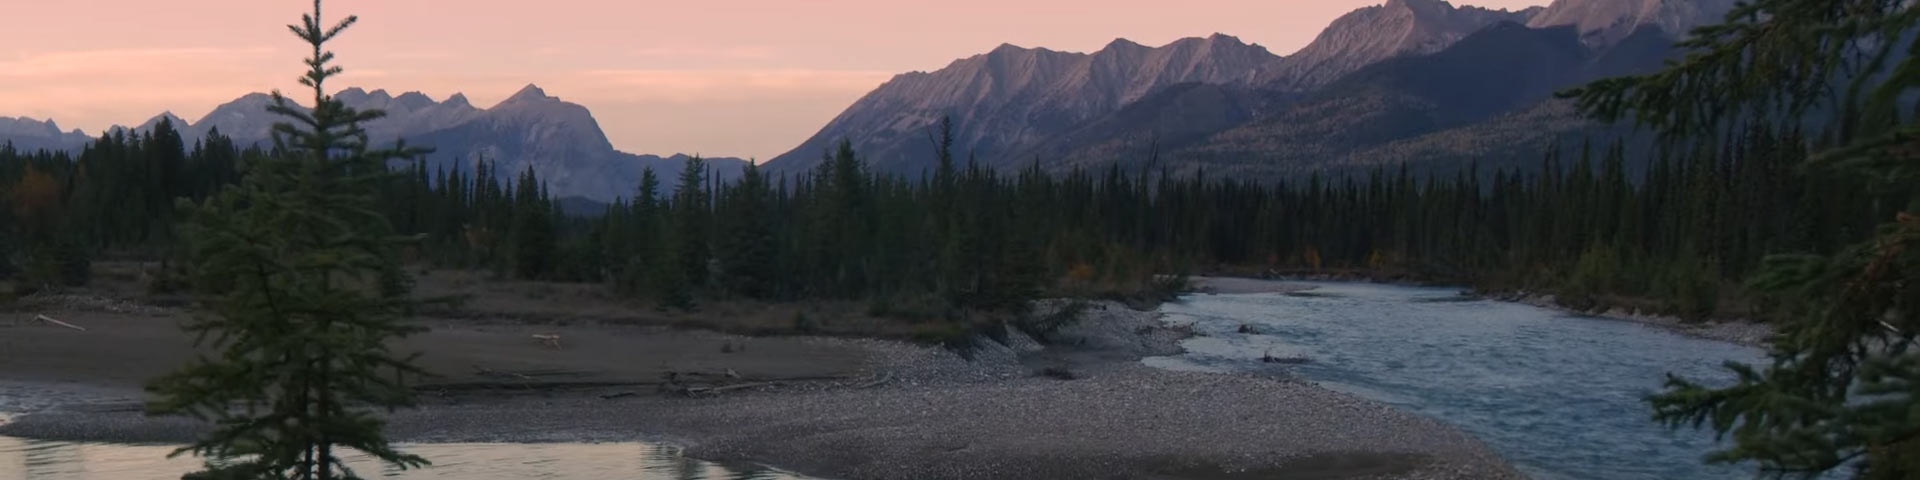 Sunset view of mountains and a river